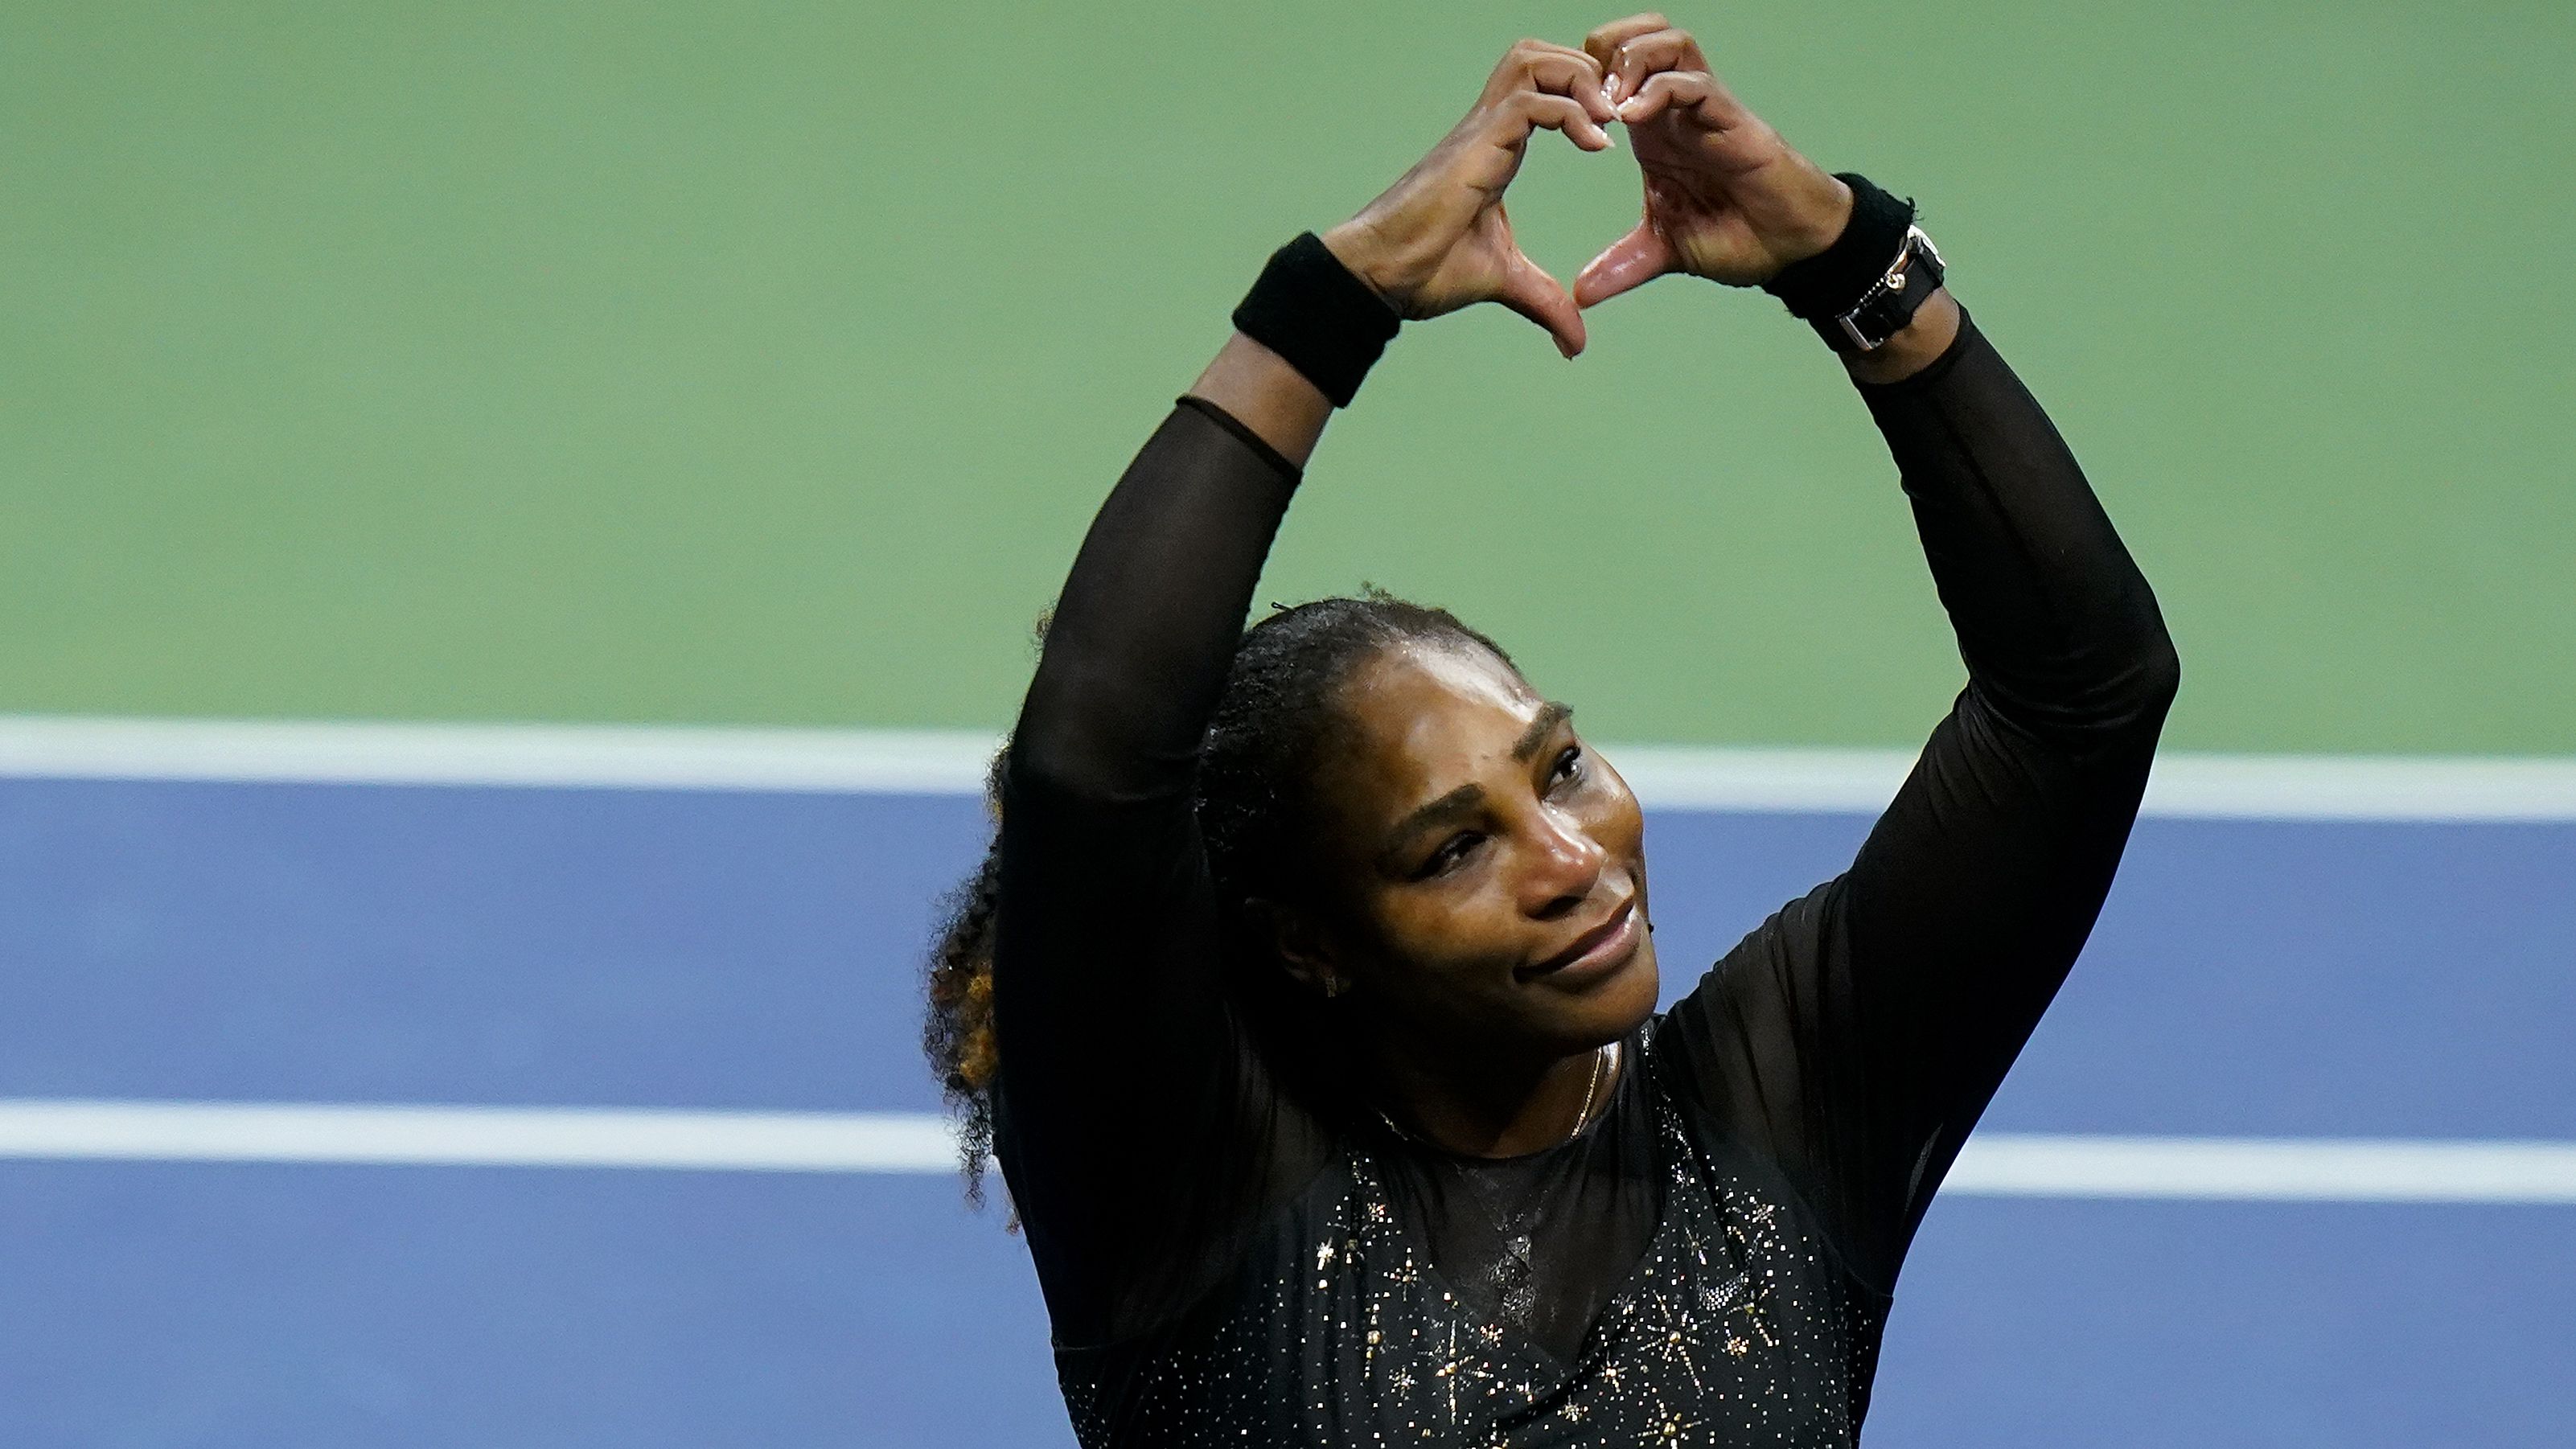 Tennis legend <a href="http://www.cnn.com/2022/08/09/tennis/gallery/serena-williams-life-in-pictures/index.html" target="_blank">Serena Williams</a> motions a heart to fans after losing in the third round of the US Open on Friday, September 2. Williams, who said she would "evolve away" from the sport after the tournament, <a href="https://www.cnn.com/2022/08/29/tennis/gallery/serena-williams-us-open-2022/index.html" target="_blank">lost to Australia's Ajla Tomljanović in three sets.</a>